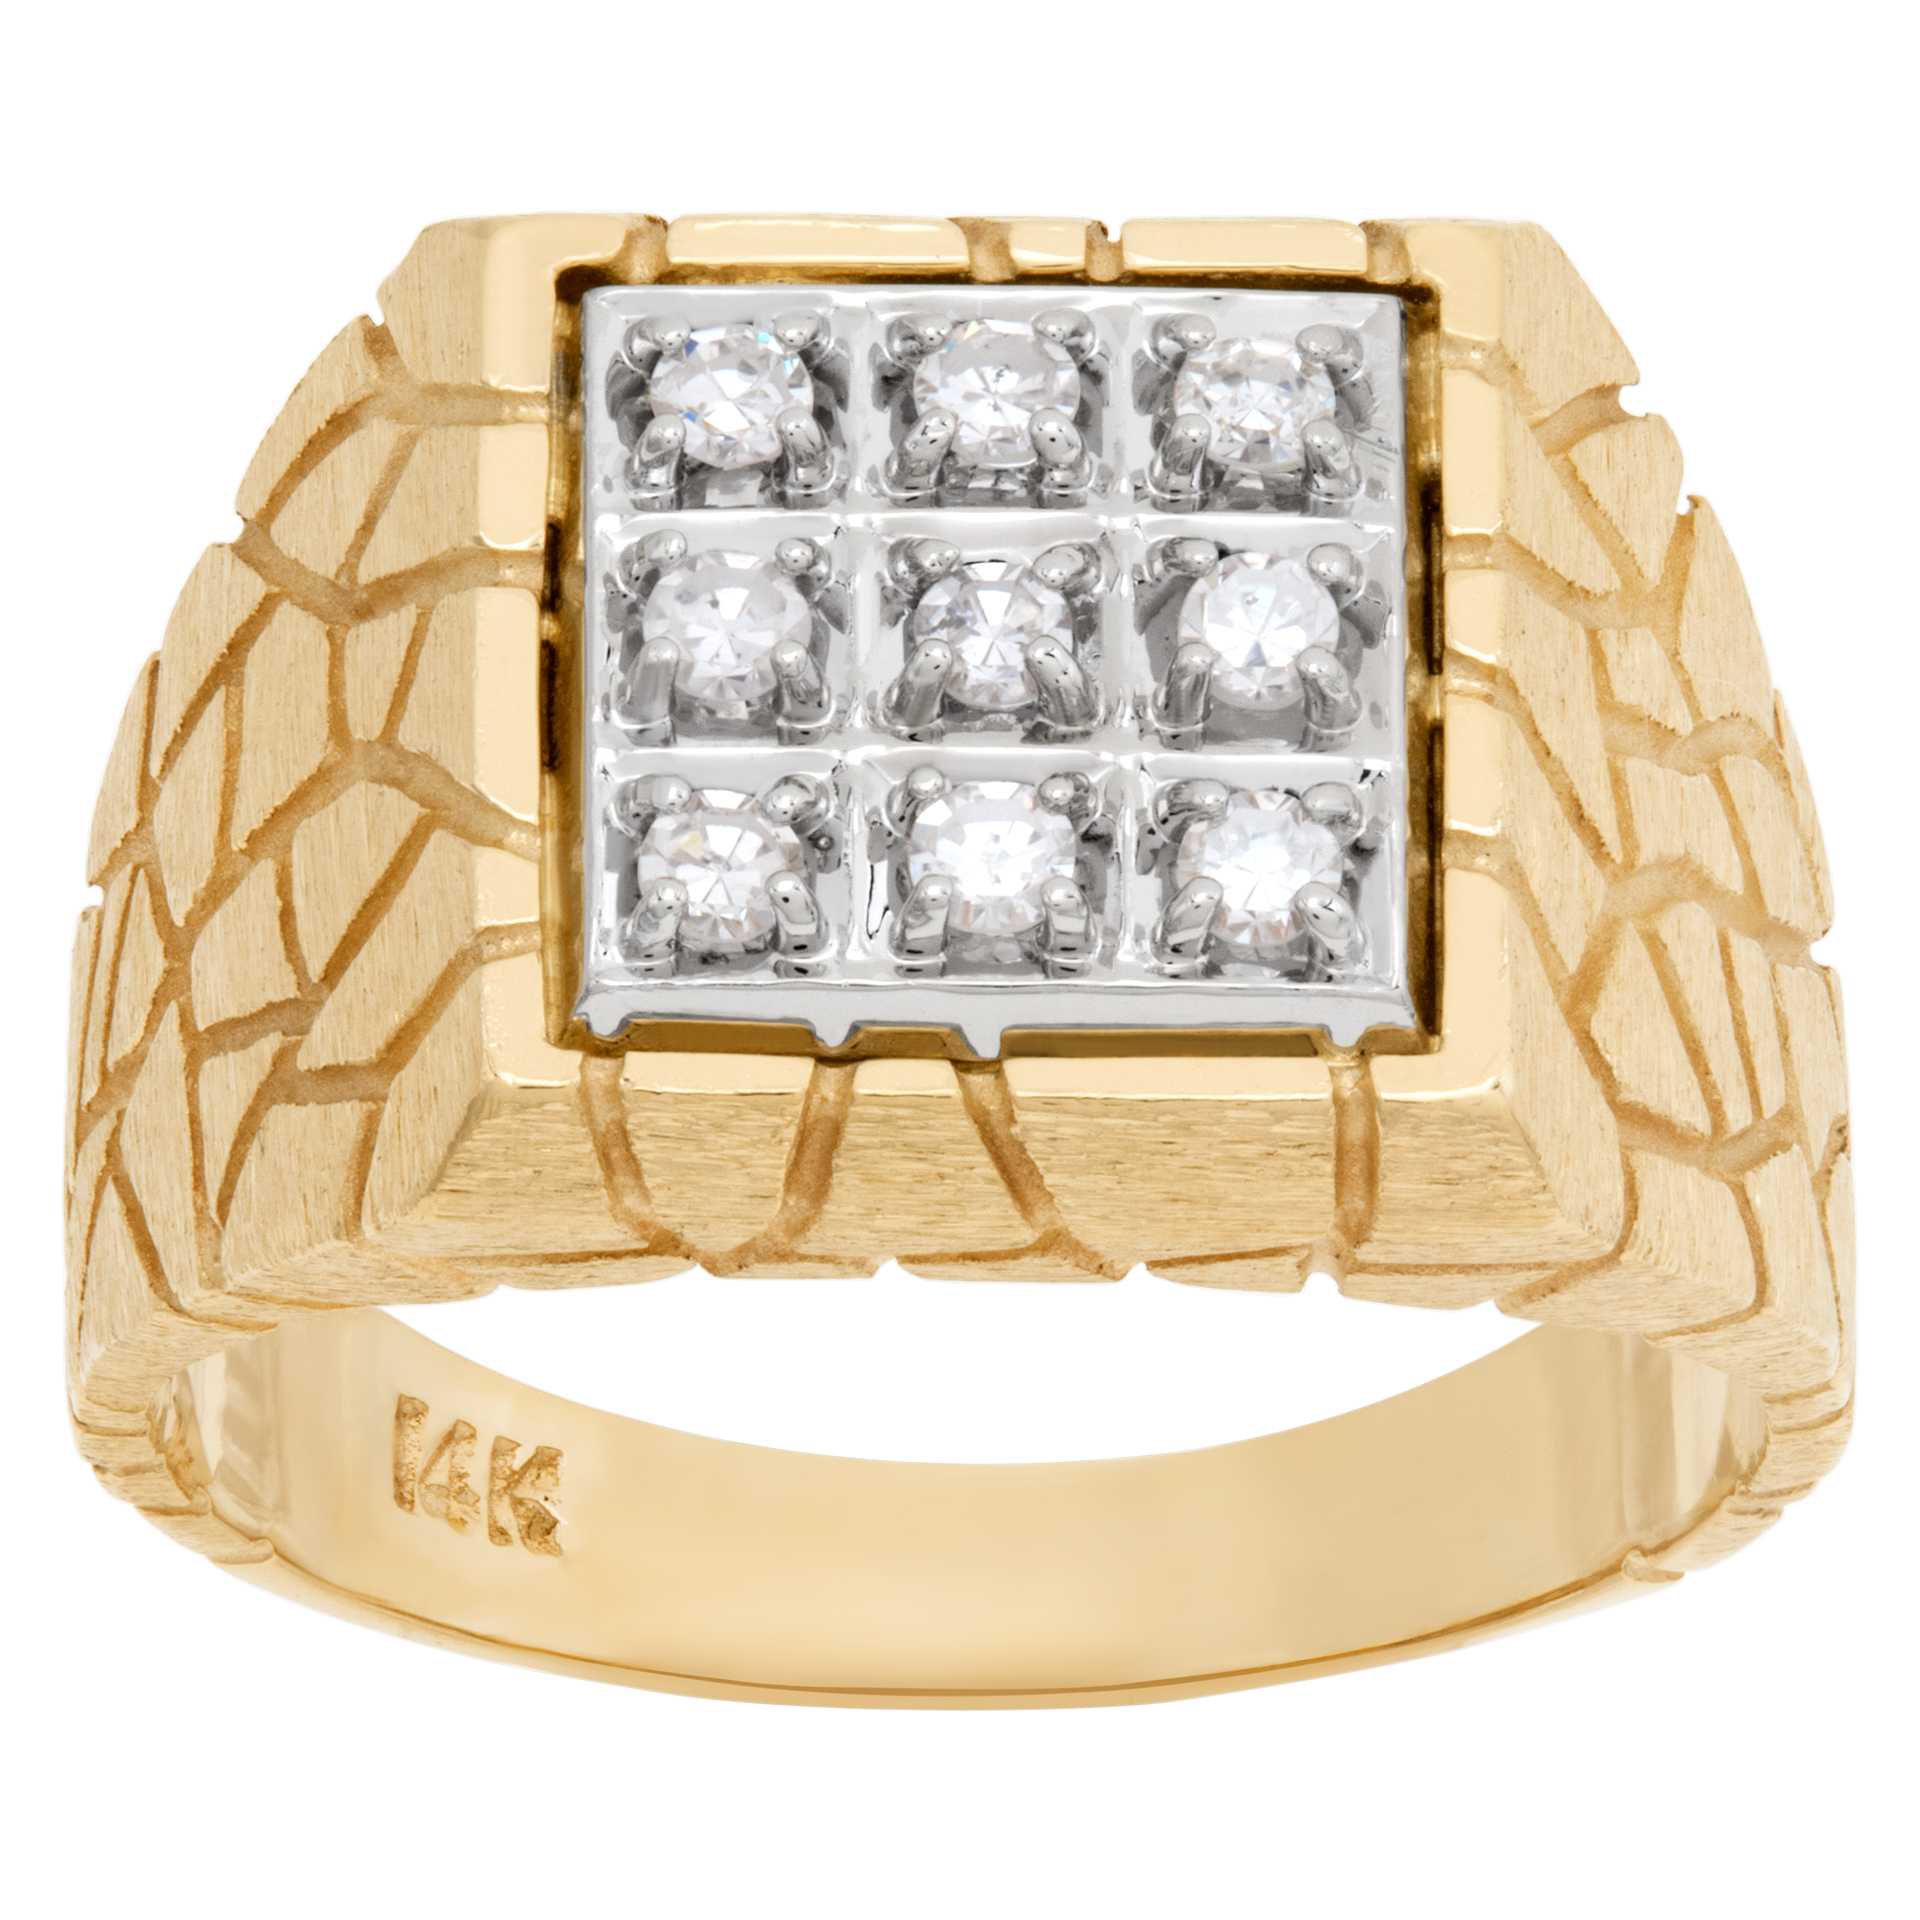 Gents diamond ring set in 14k yellow gold. 0.50 carats in diamonds. Size 10 image 1